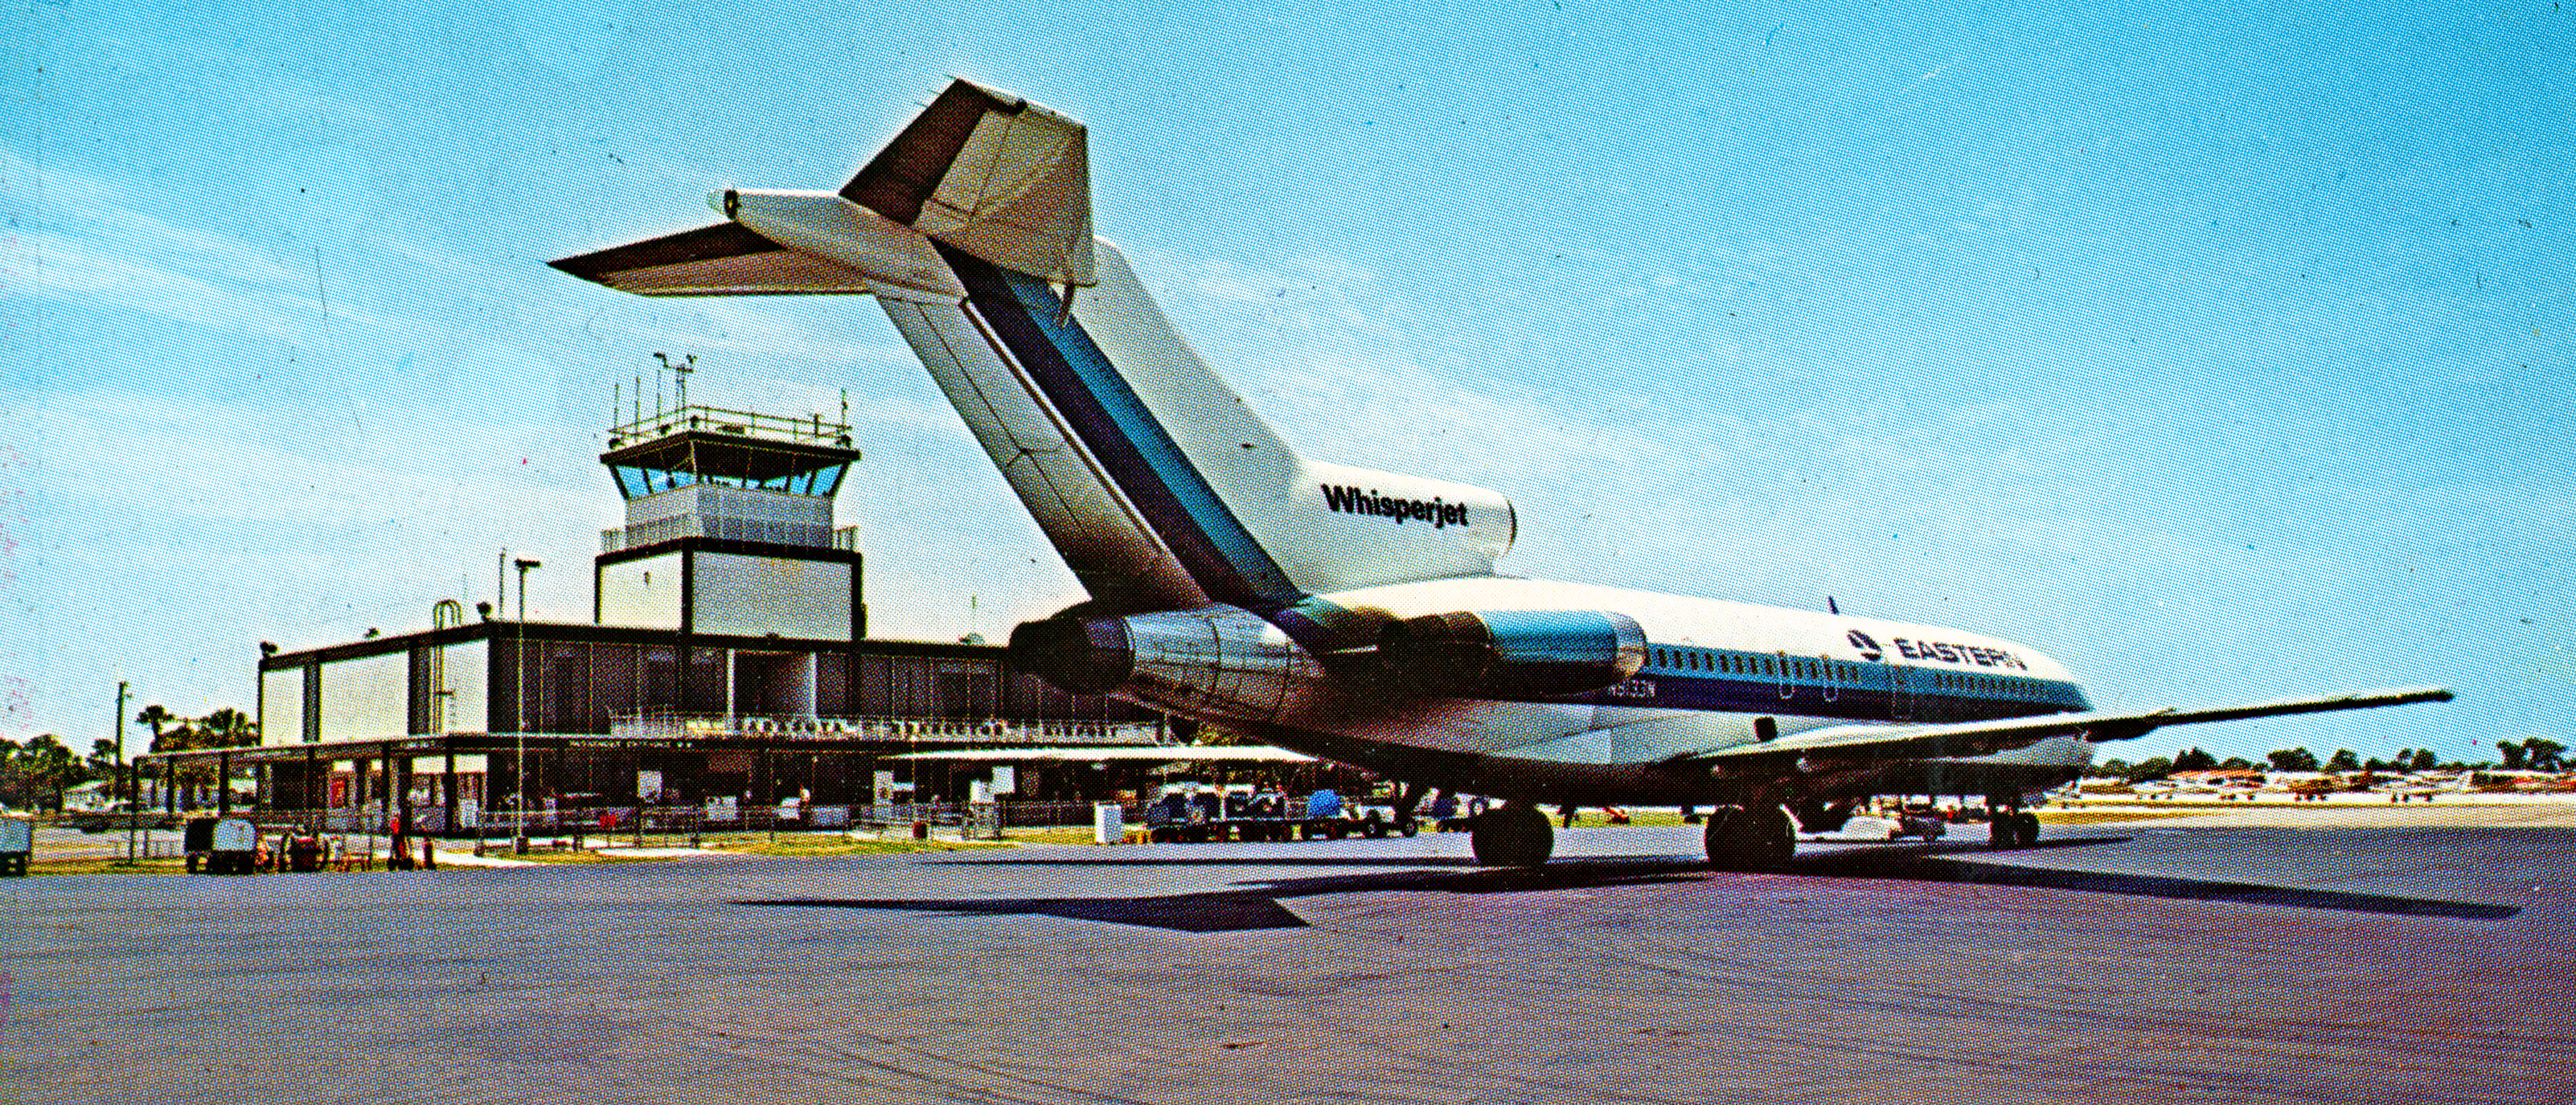 A color postcard of an airplane jet at the SRQ airport.